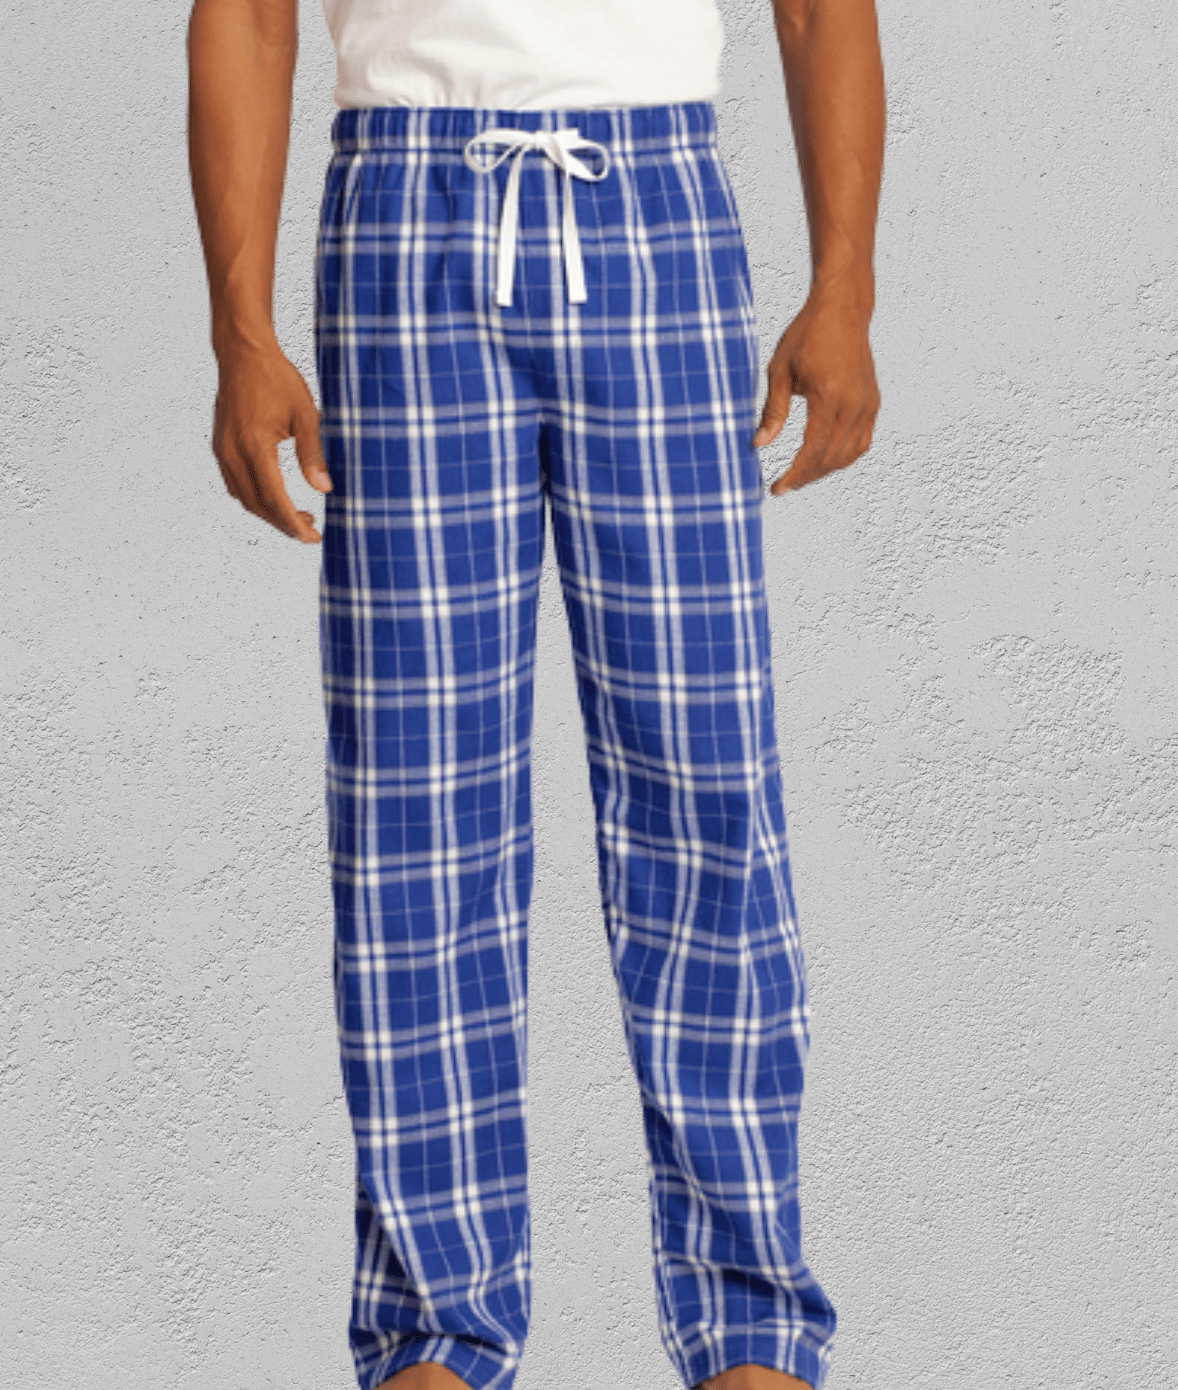 Men's Ridiculously Soft 100% Cotton Drawstring Flannel Pants